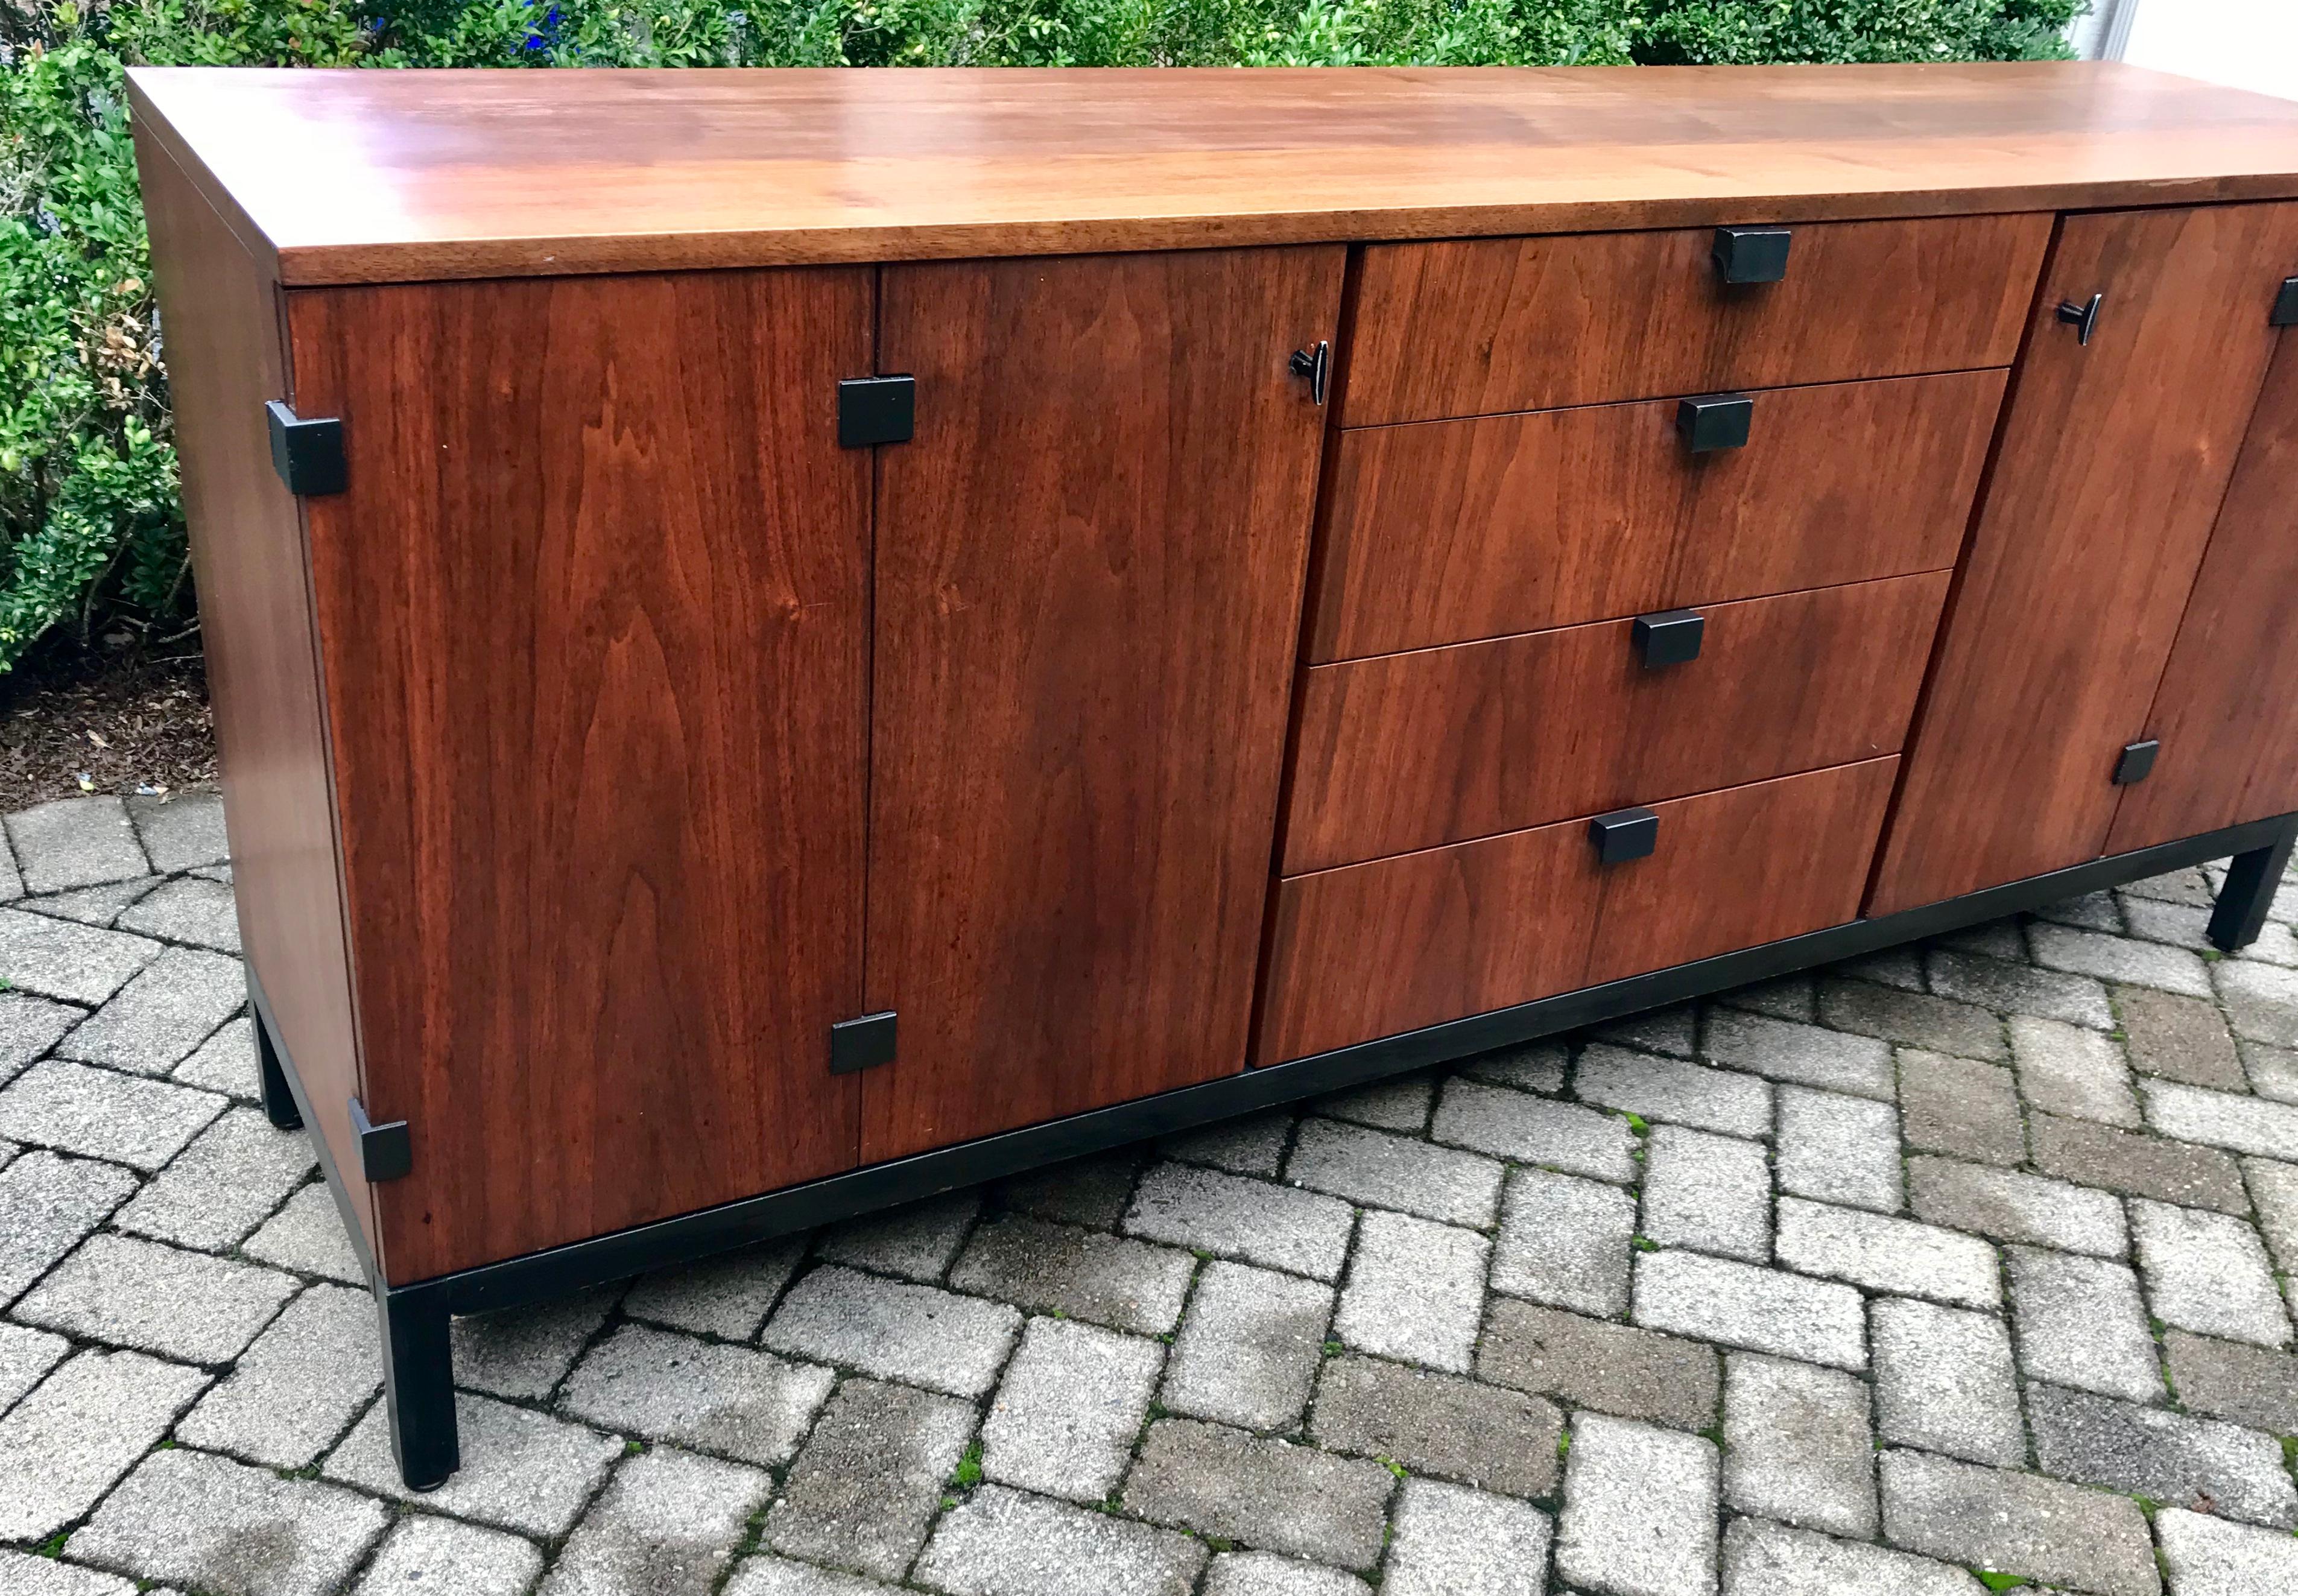 American Mid-Century Modern Walnut Sideboard Credenza by Milo Baughman for Directional